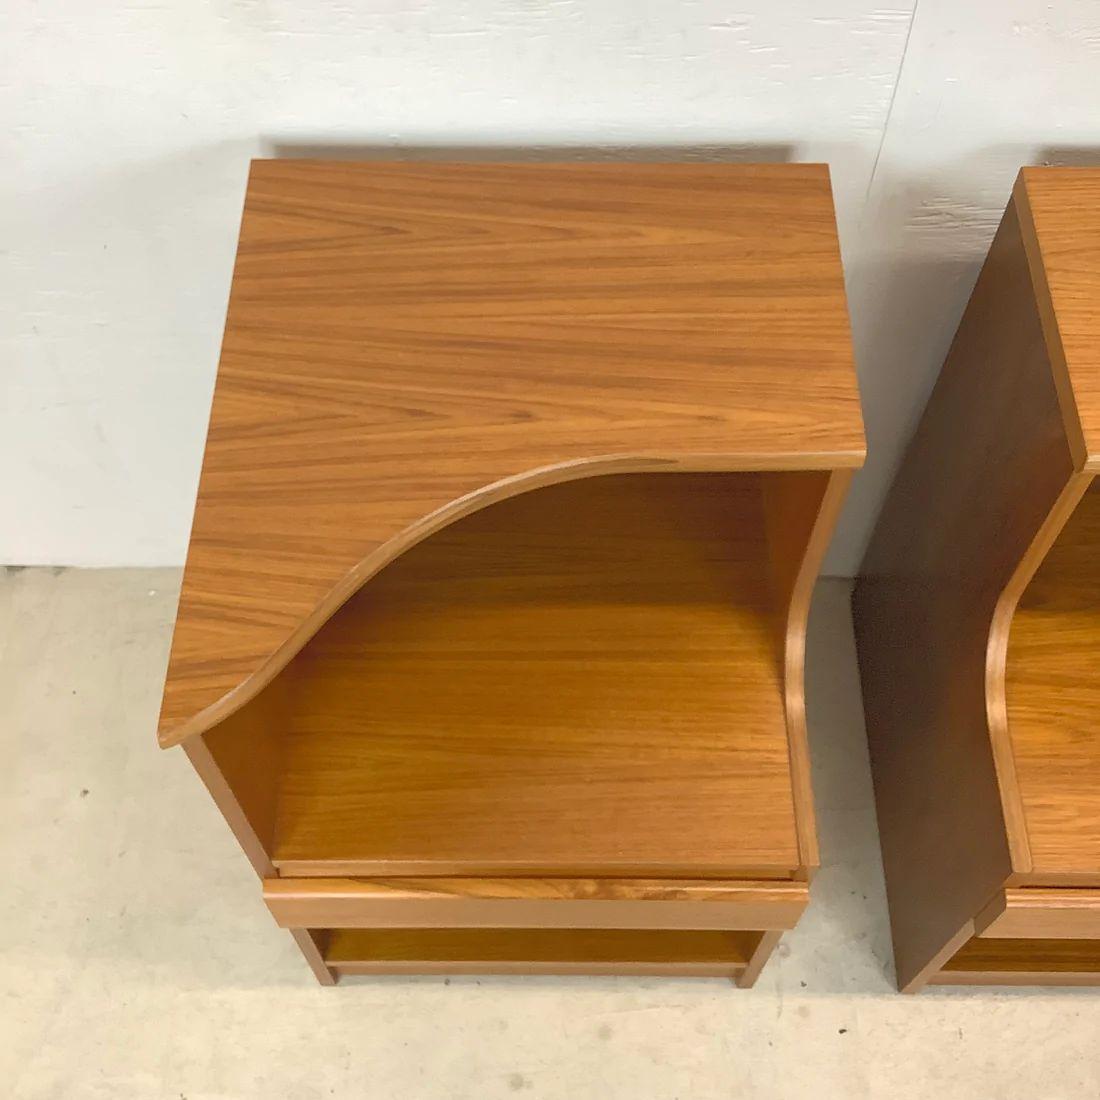 This impressive and large scale pair of teak bedside tables feature two tier design, spacious drawer, and open lower cabinet. The perfect pair of Scandinavian Modern style nightstands to add in any setting.

Dimensions: 18.5 W x 20.25 D x 29